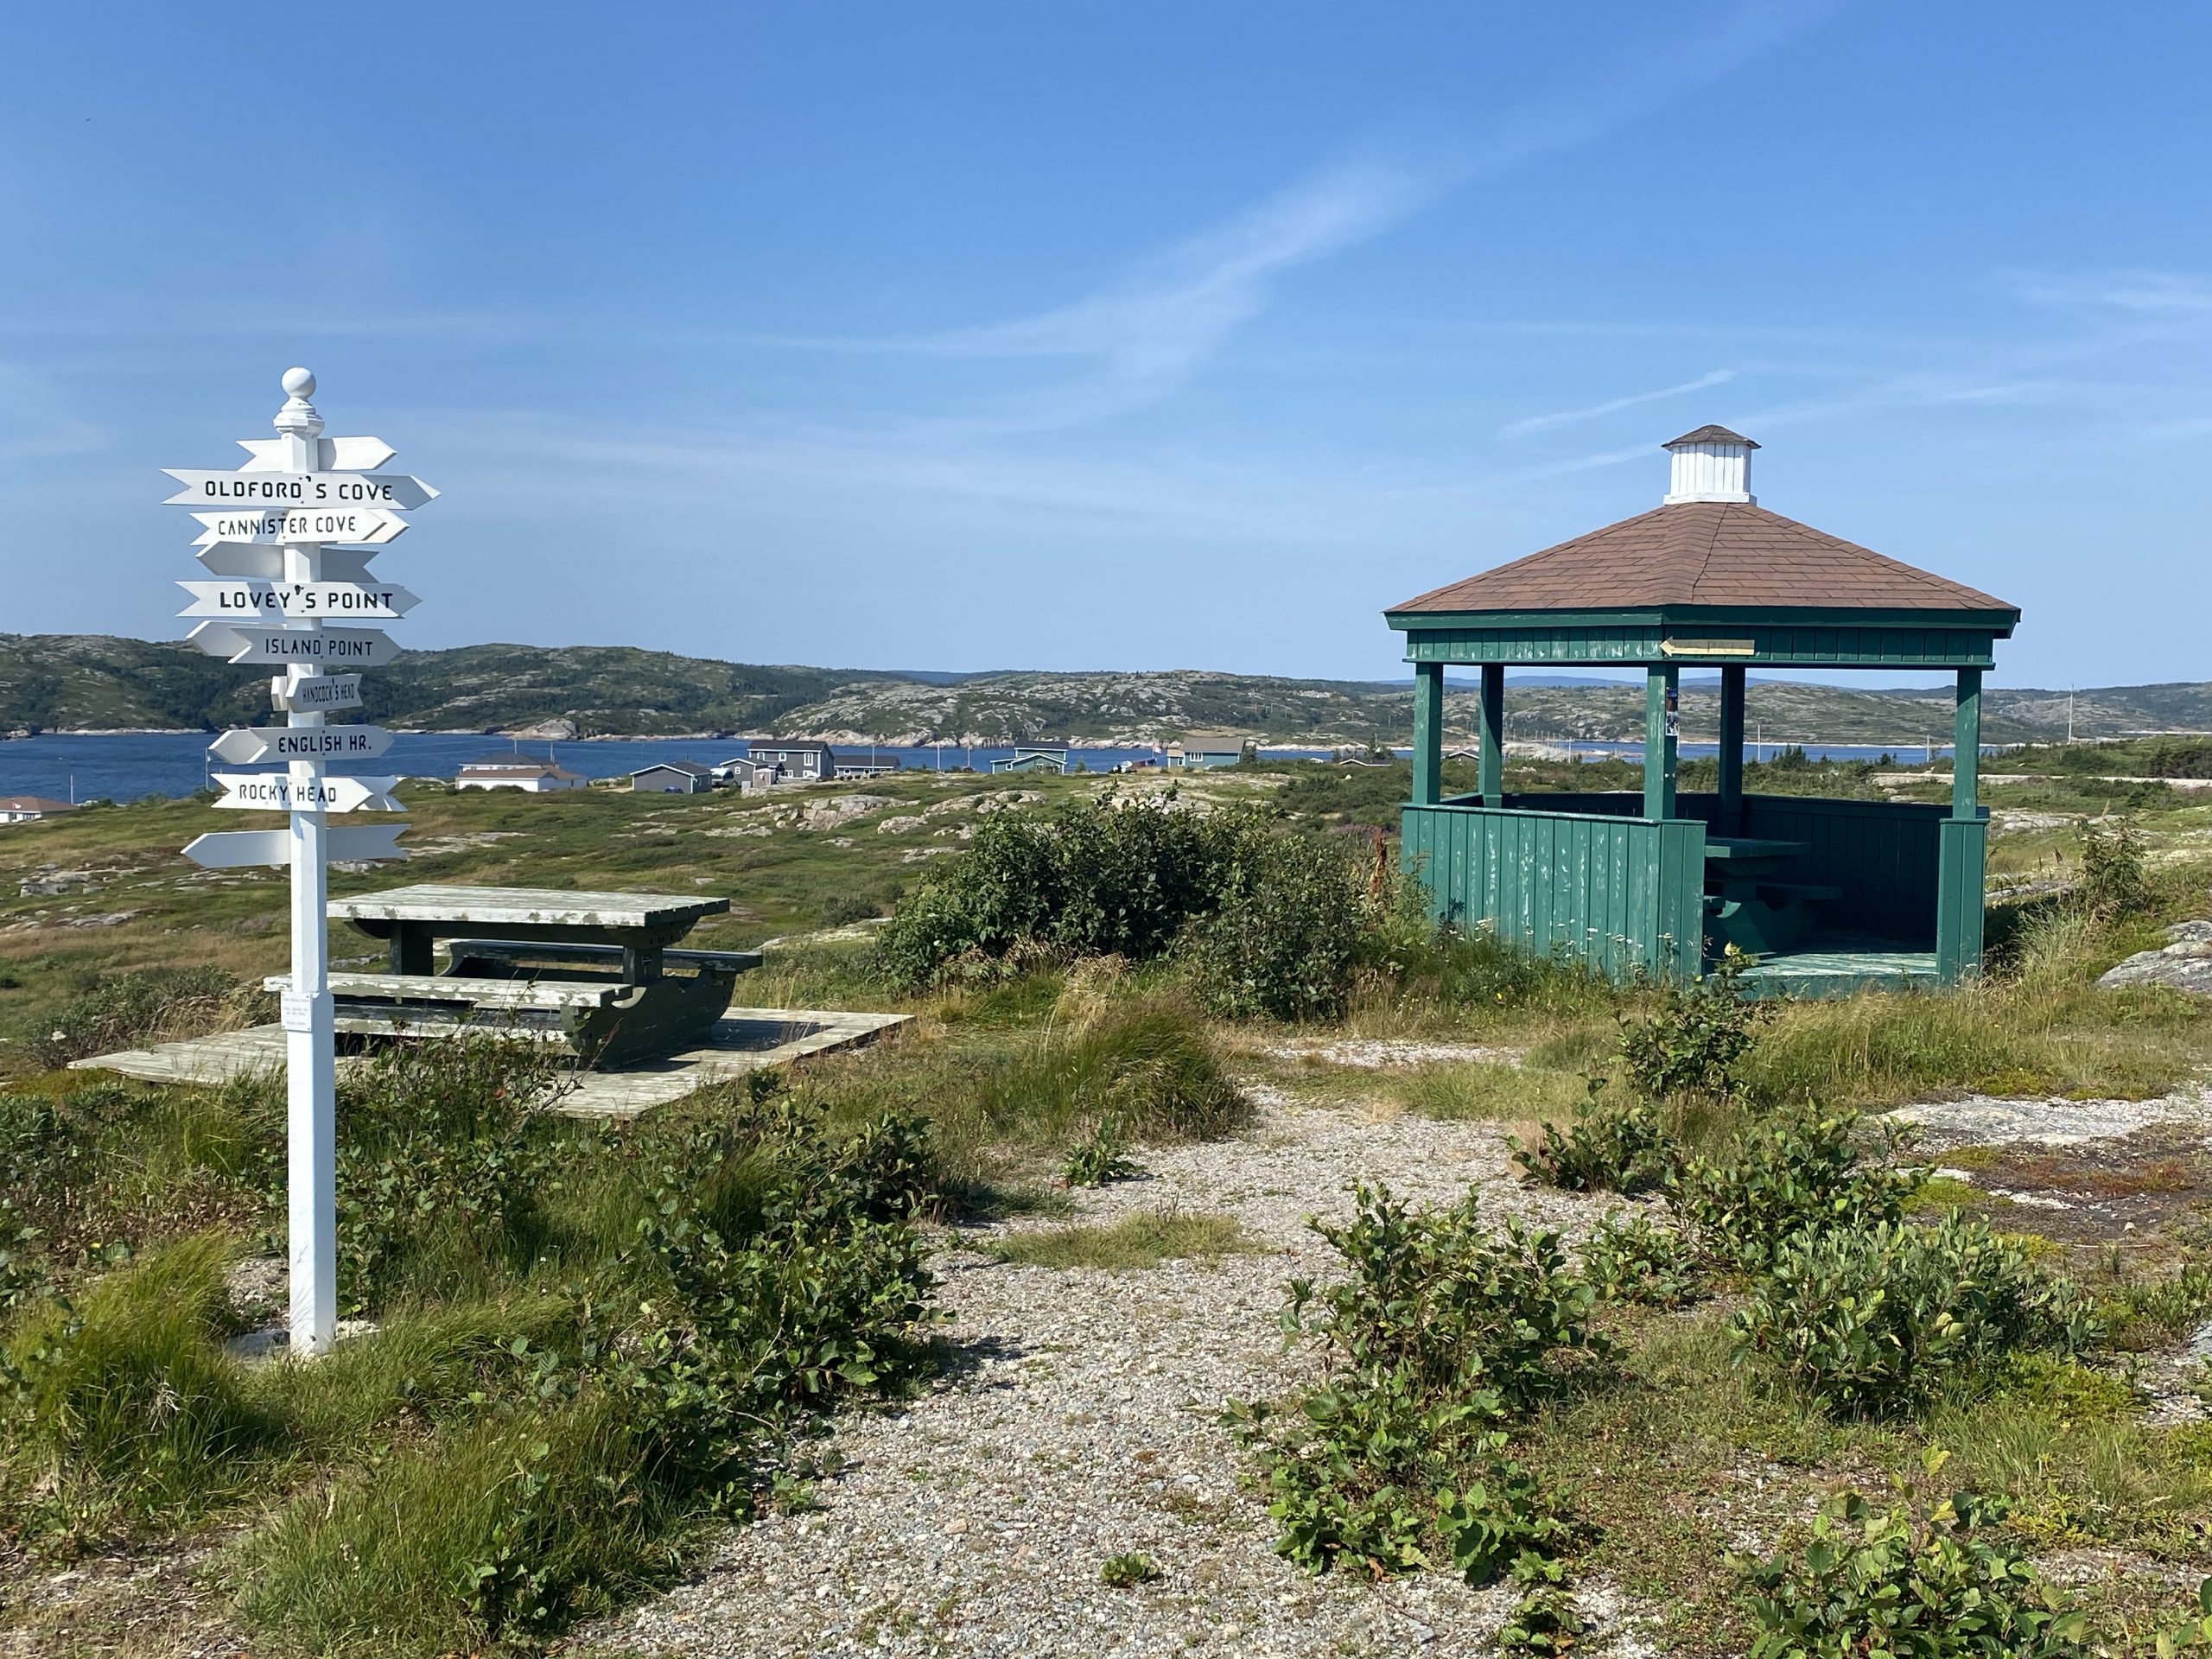 A gazebo and signpost at the Sealing Captains park in Greenspond, on Wings Island, in Newfoundland.